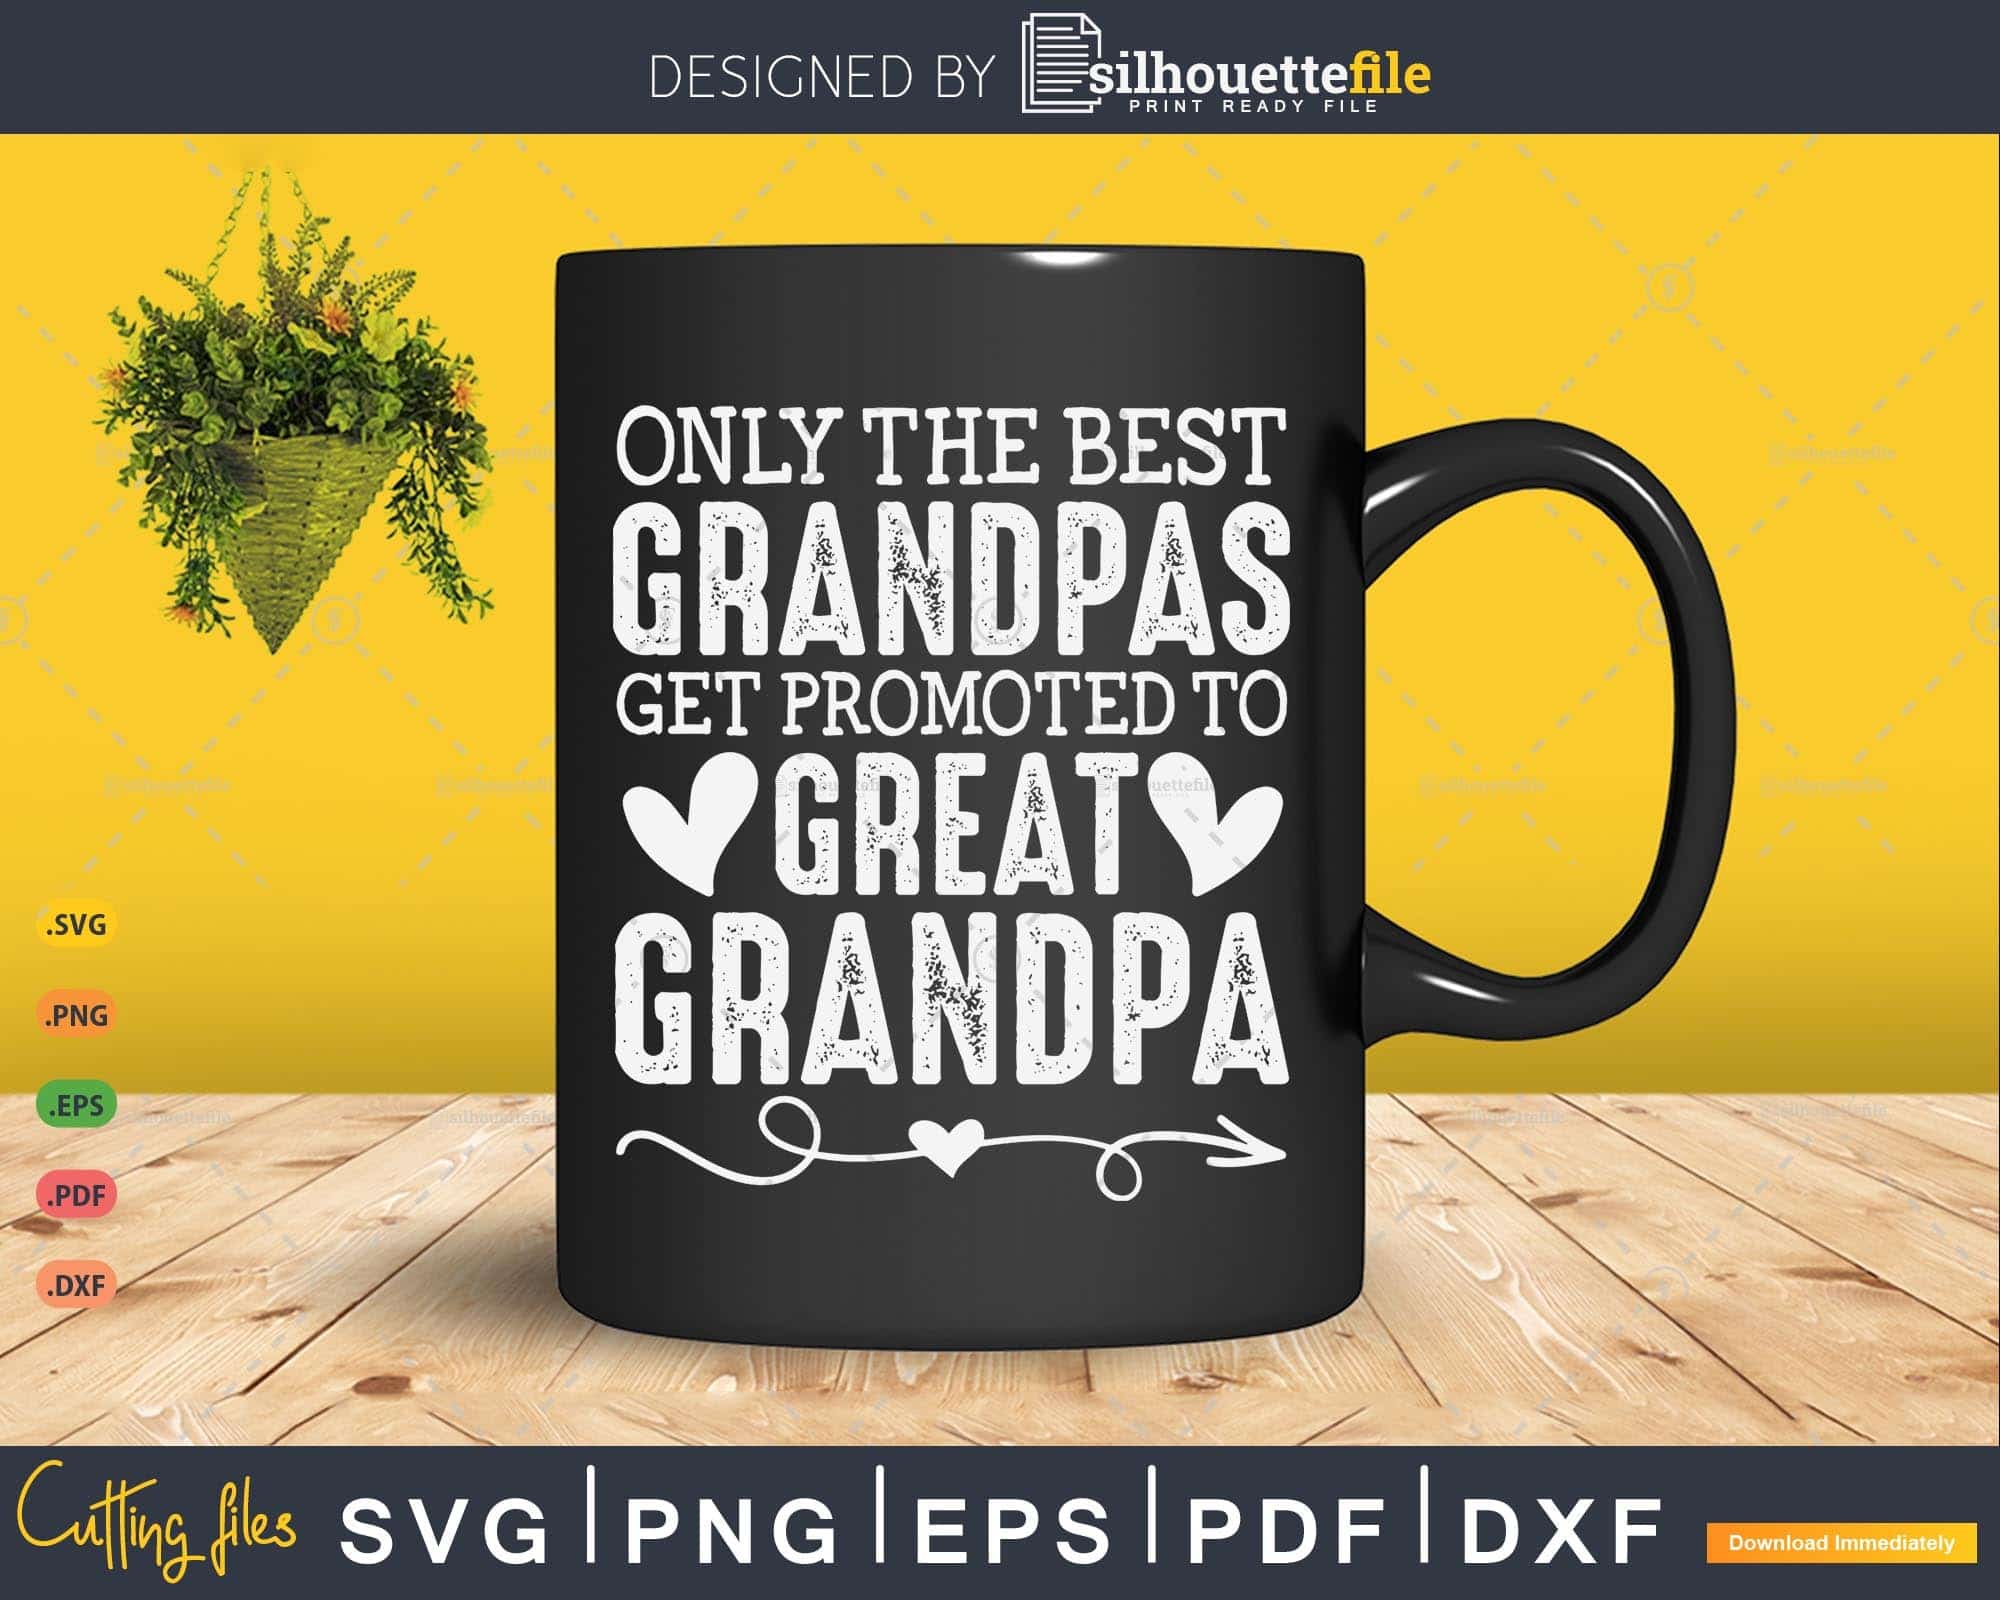 https://cdn.shopify.com/s/files/1/0356/6554/3307/products/only-the-best-grandpas-get-promoted-to-great-grandpa-svg-silhouettefile-111.jpg